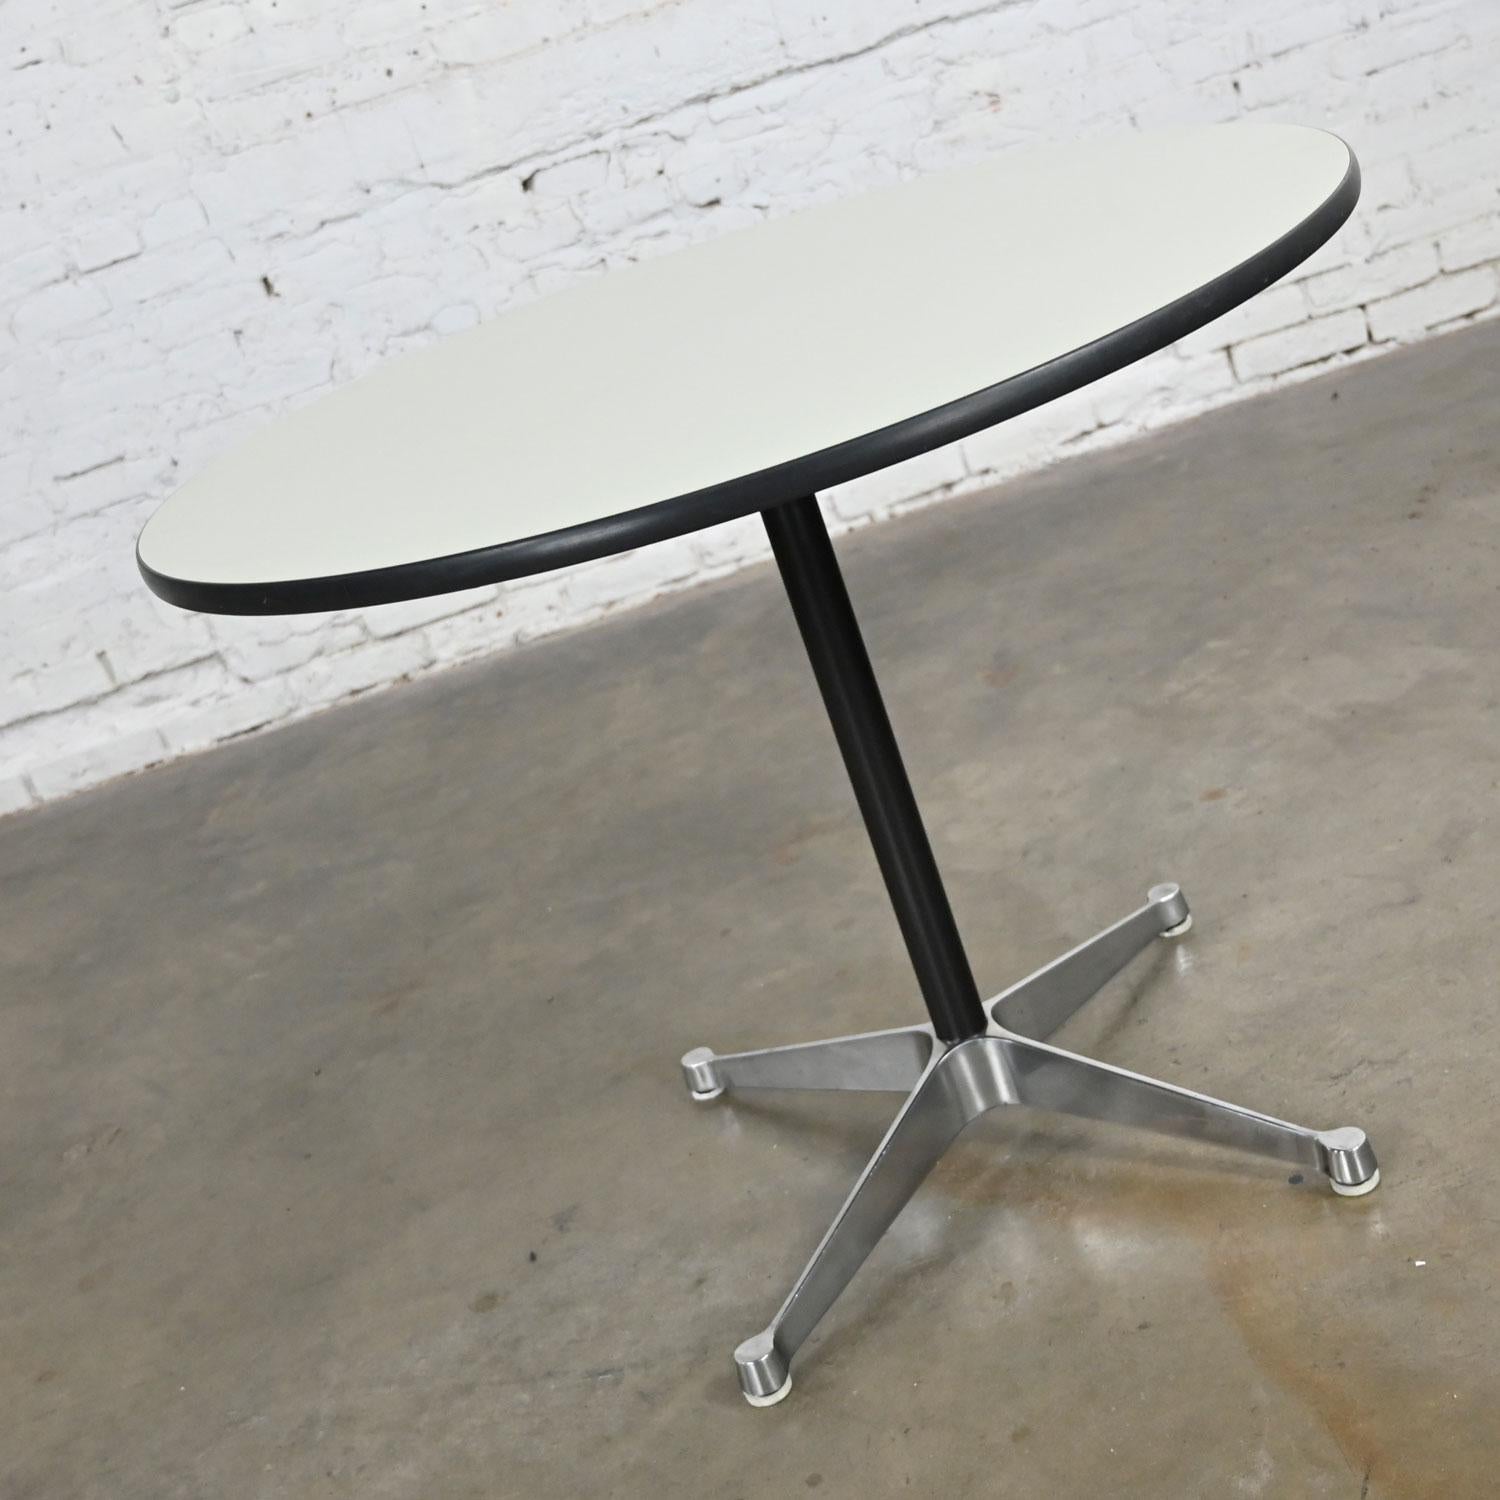 Table Vintage Eames Herman Miller MCM Aluminum Group 4 Prong Contract Base White Laminate Top

Magnifique table vintage Eames for Herman Miller mid-century modern Aluminum Group 4 prong chrome Contract base with black shaft and white laminate tops